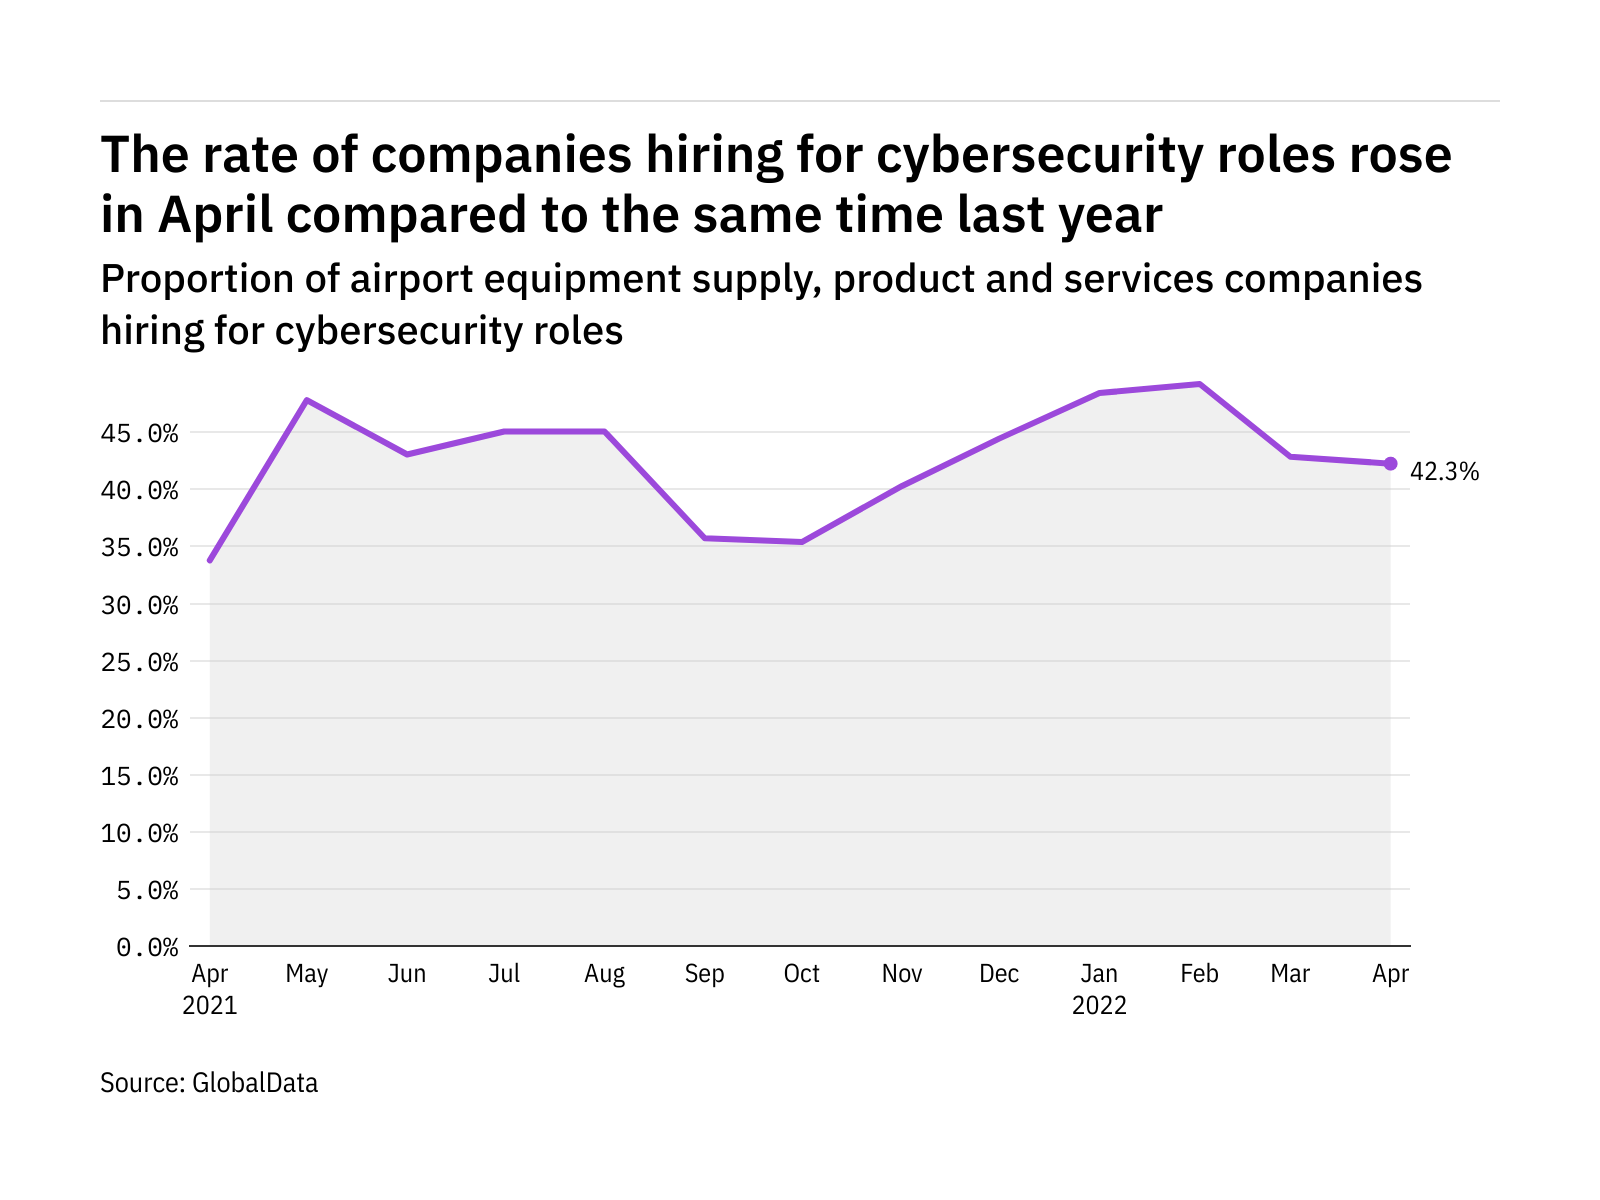 Cybersecurity hiring levels in the airport industry rose in April 2022